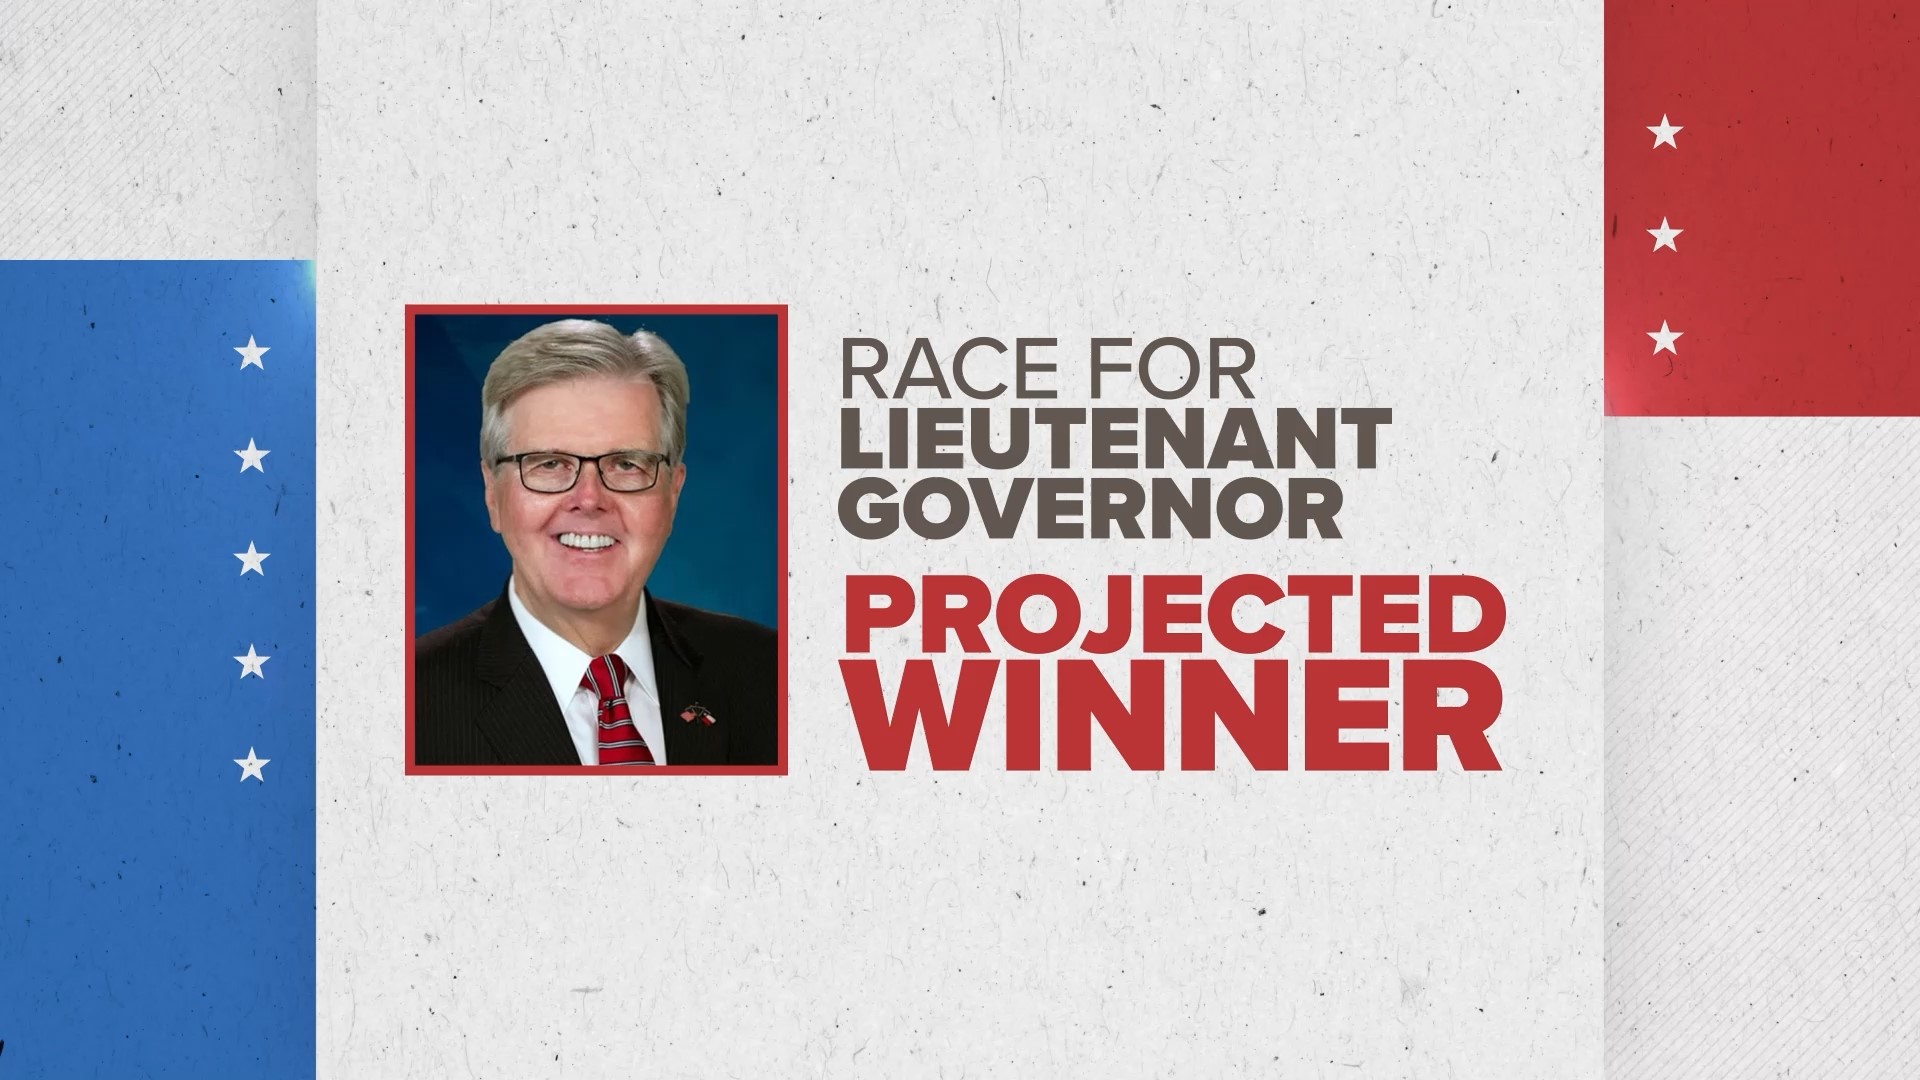 Republican incumbent Patrick will serve a third term after defeating Democratic challenger Collier, who had been endorsed by several high-profile Texas Republicans.